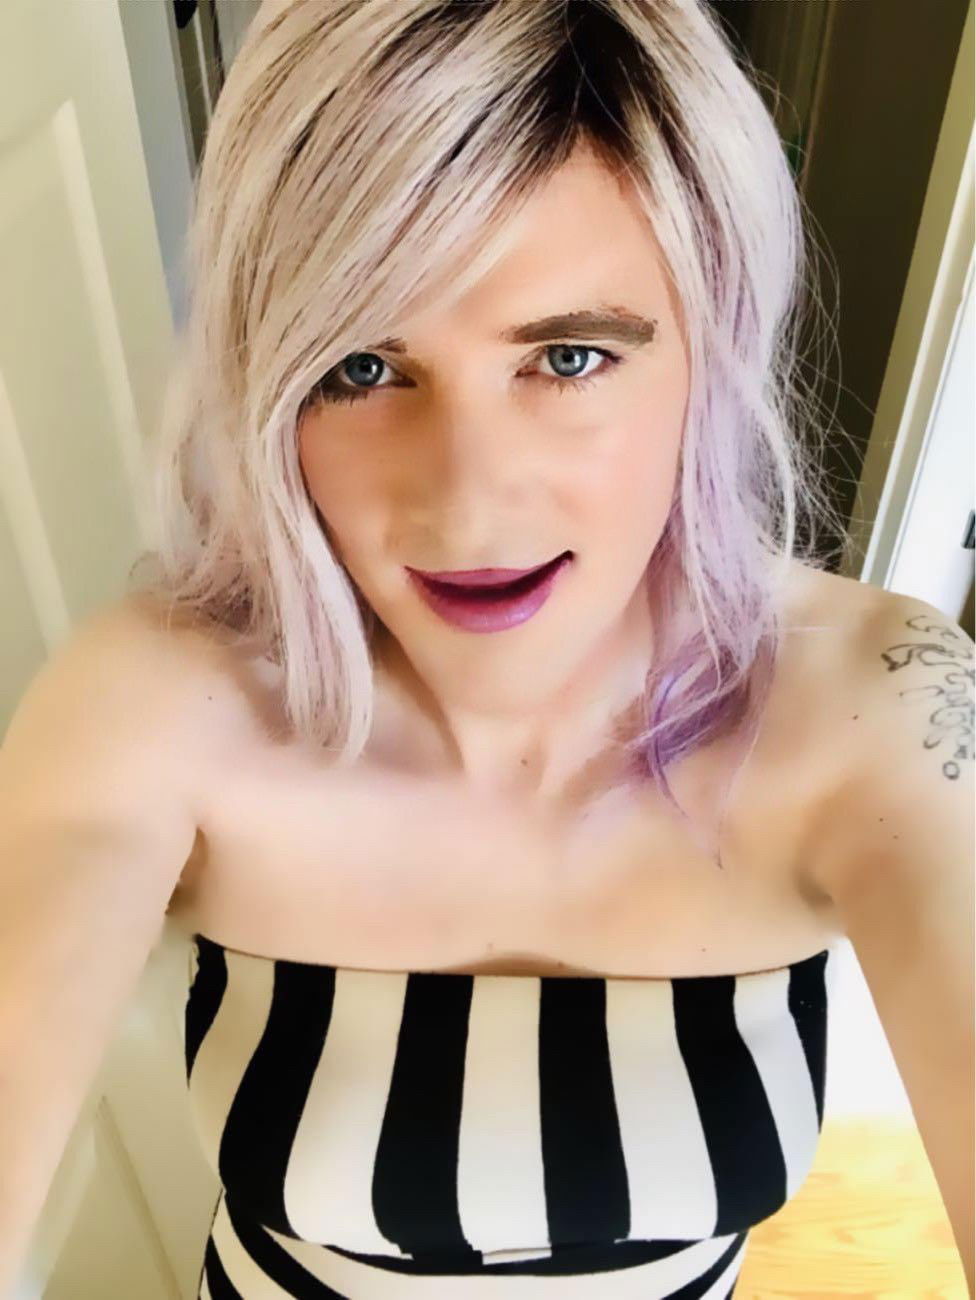 Watch the Photo by Shonni B with the username @ShonniB, who is a verified user, posted on July 27, 2021 and the text says 'I'm a BC Canada based sissy seeking a hot daddy. hmu'